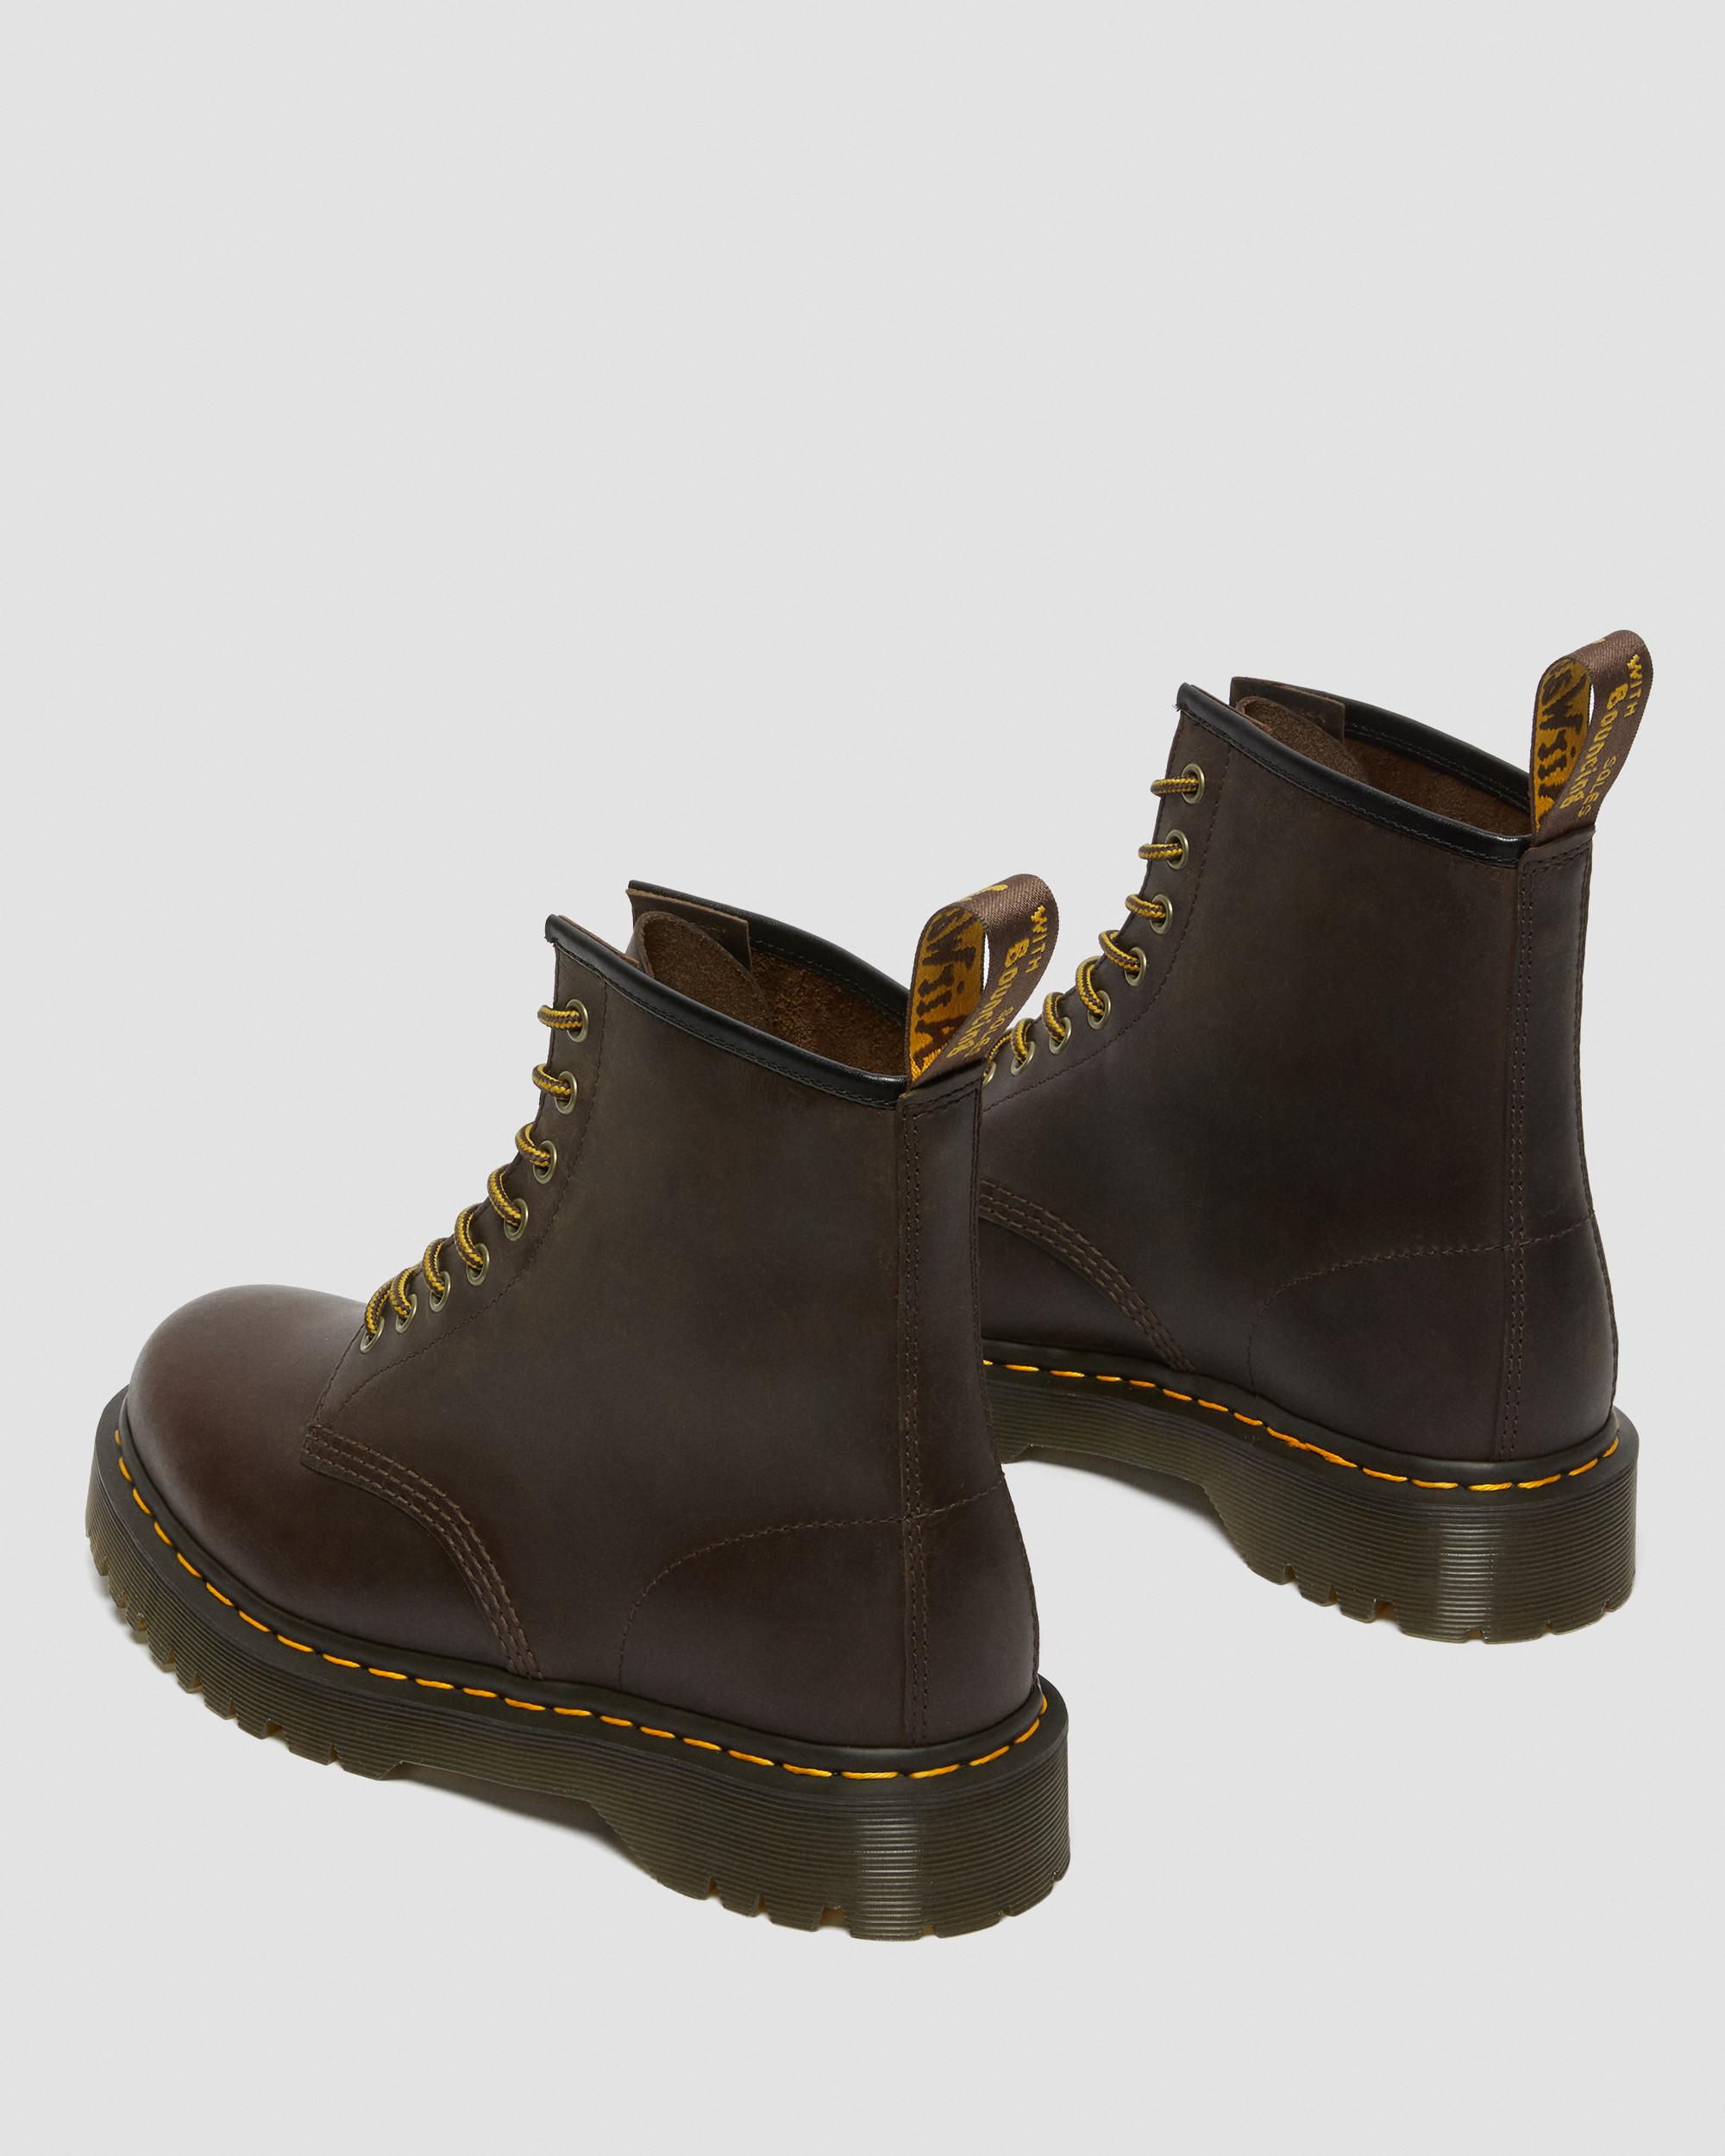 DR MARTENS 1460 Bex Crazy Horse Leather Lace Up Boots